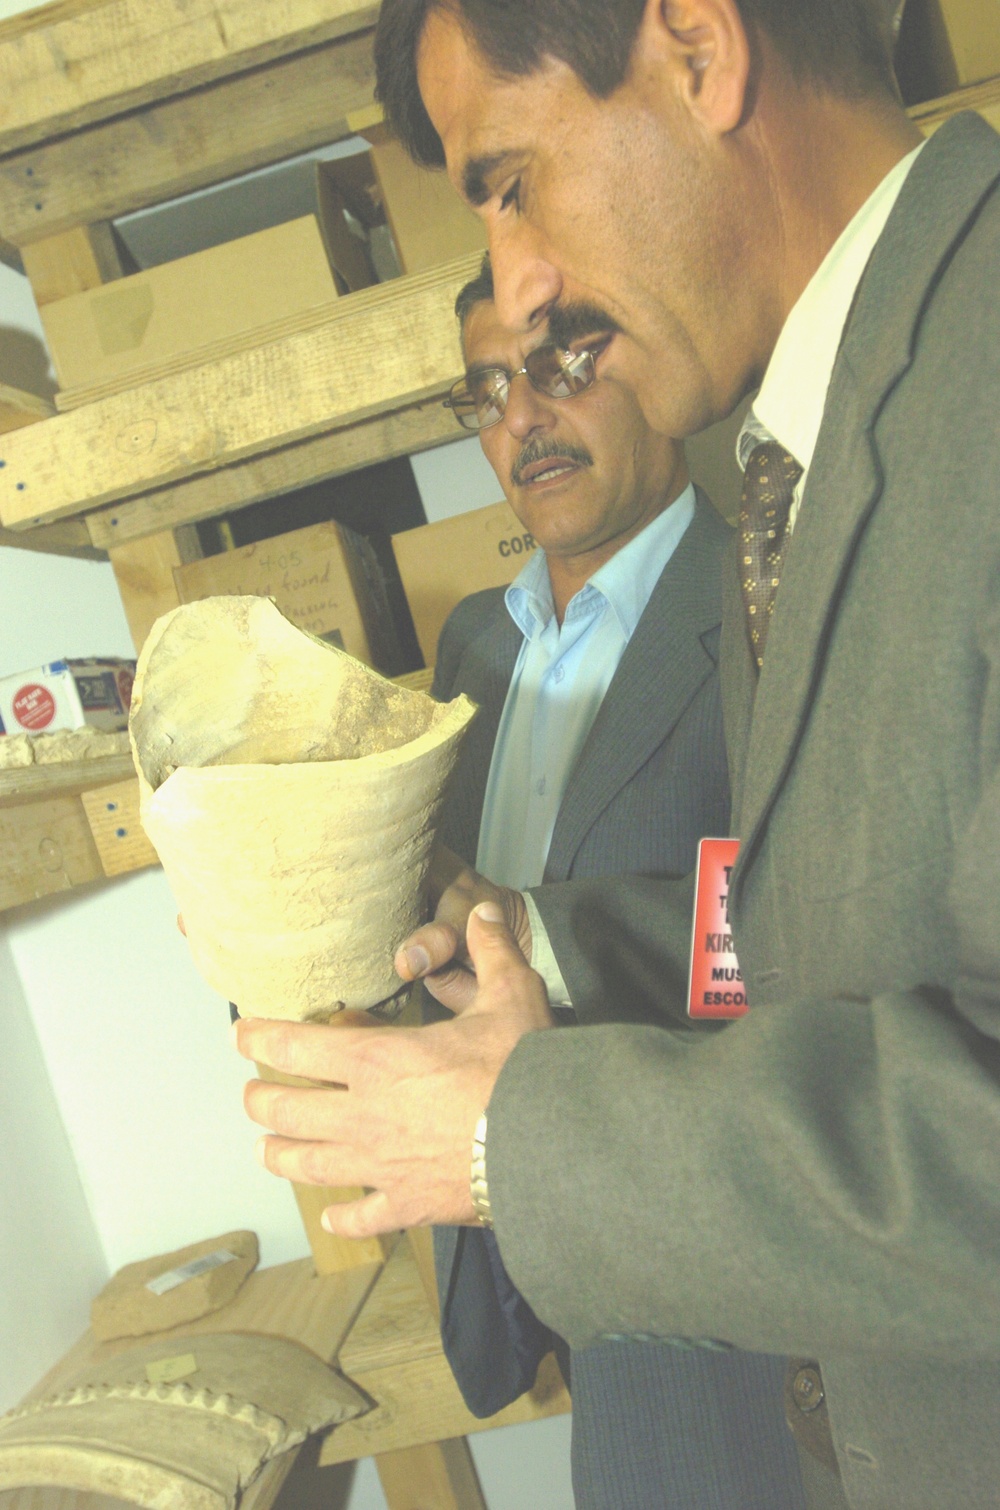 Ancient artifacts returned to Iraqis